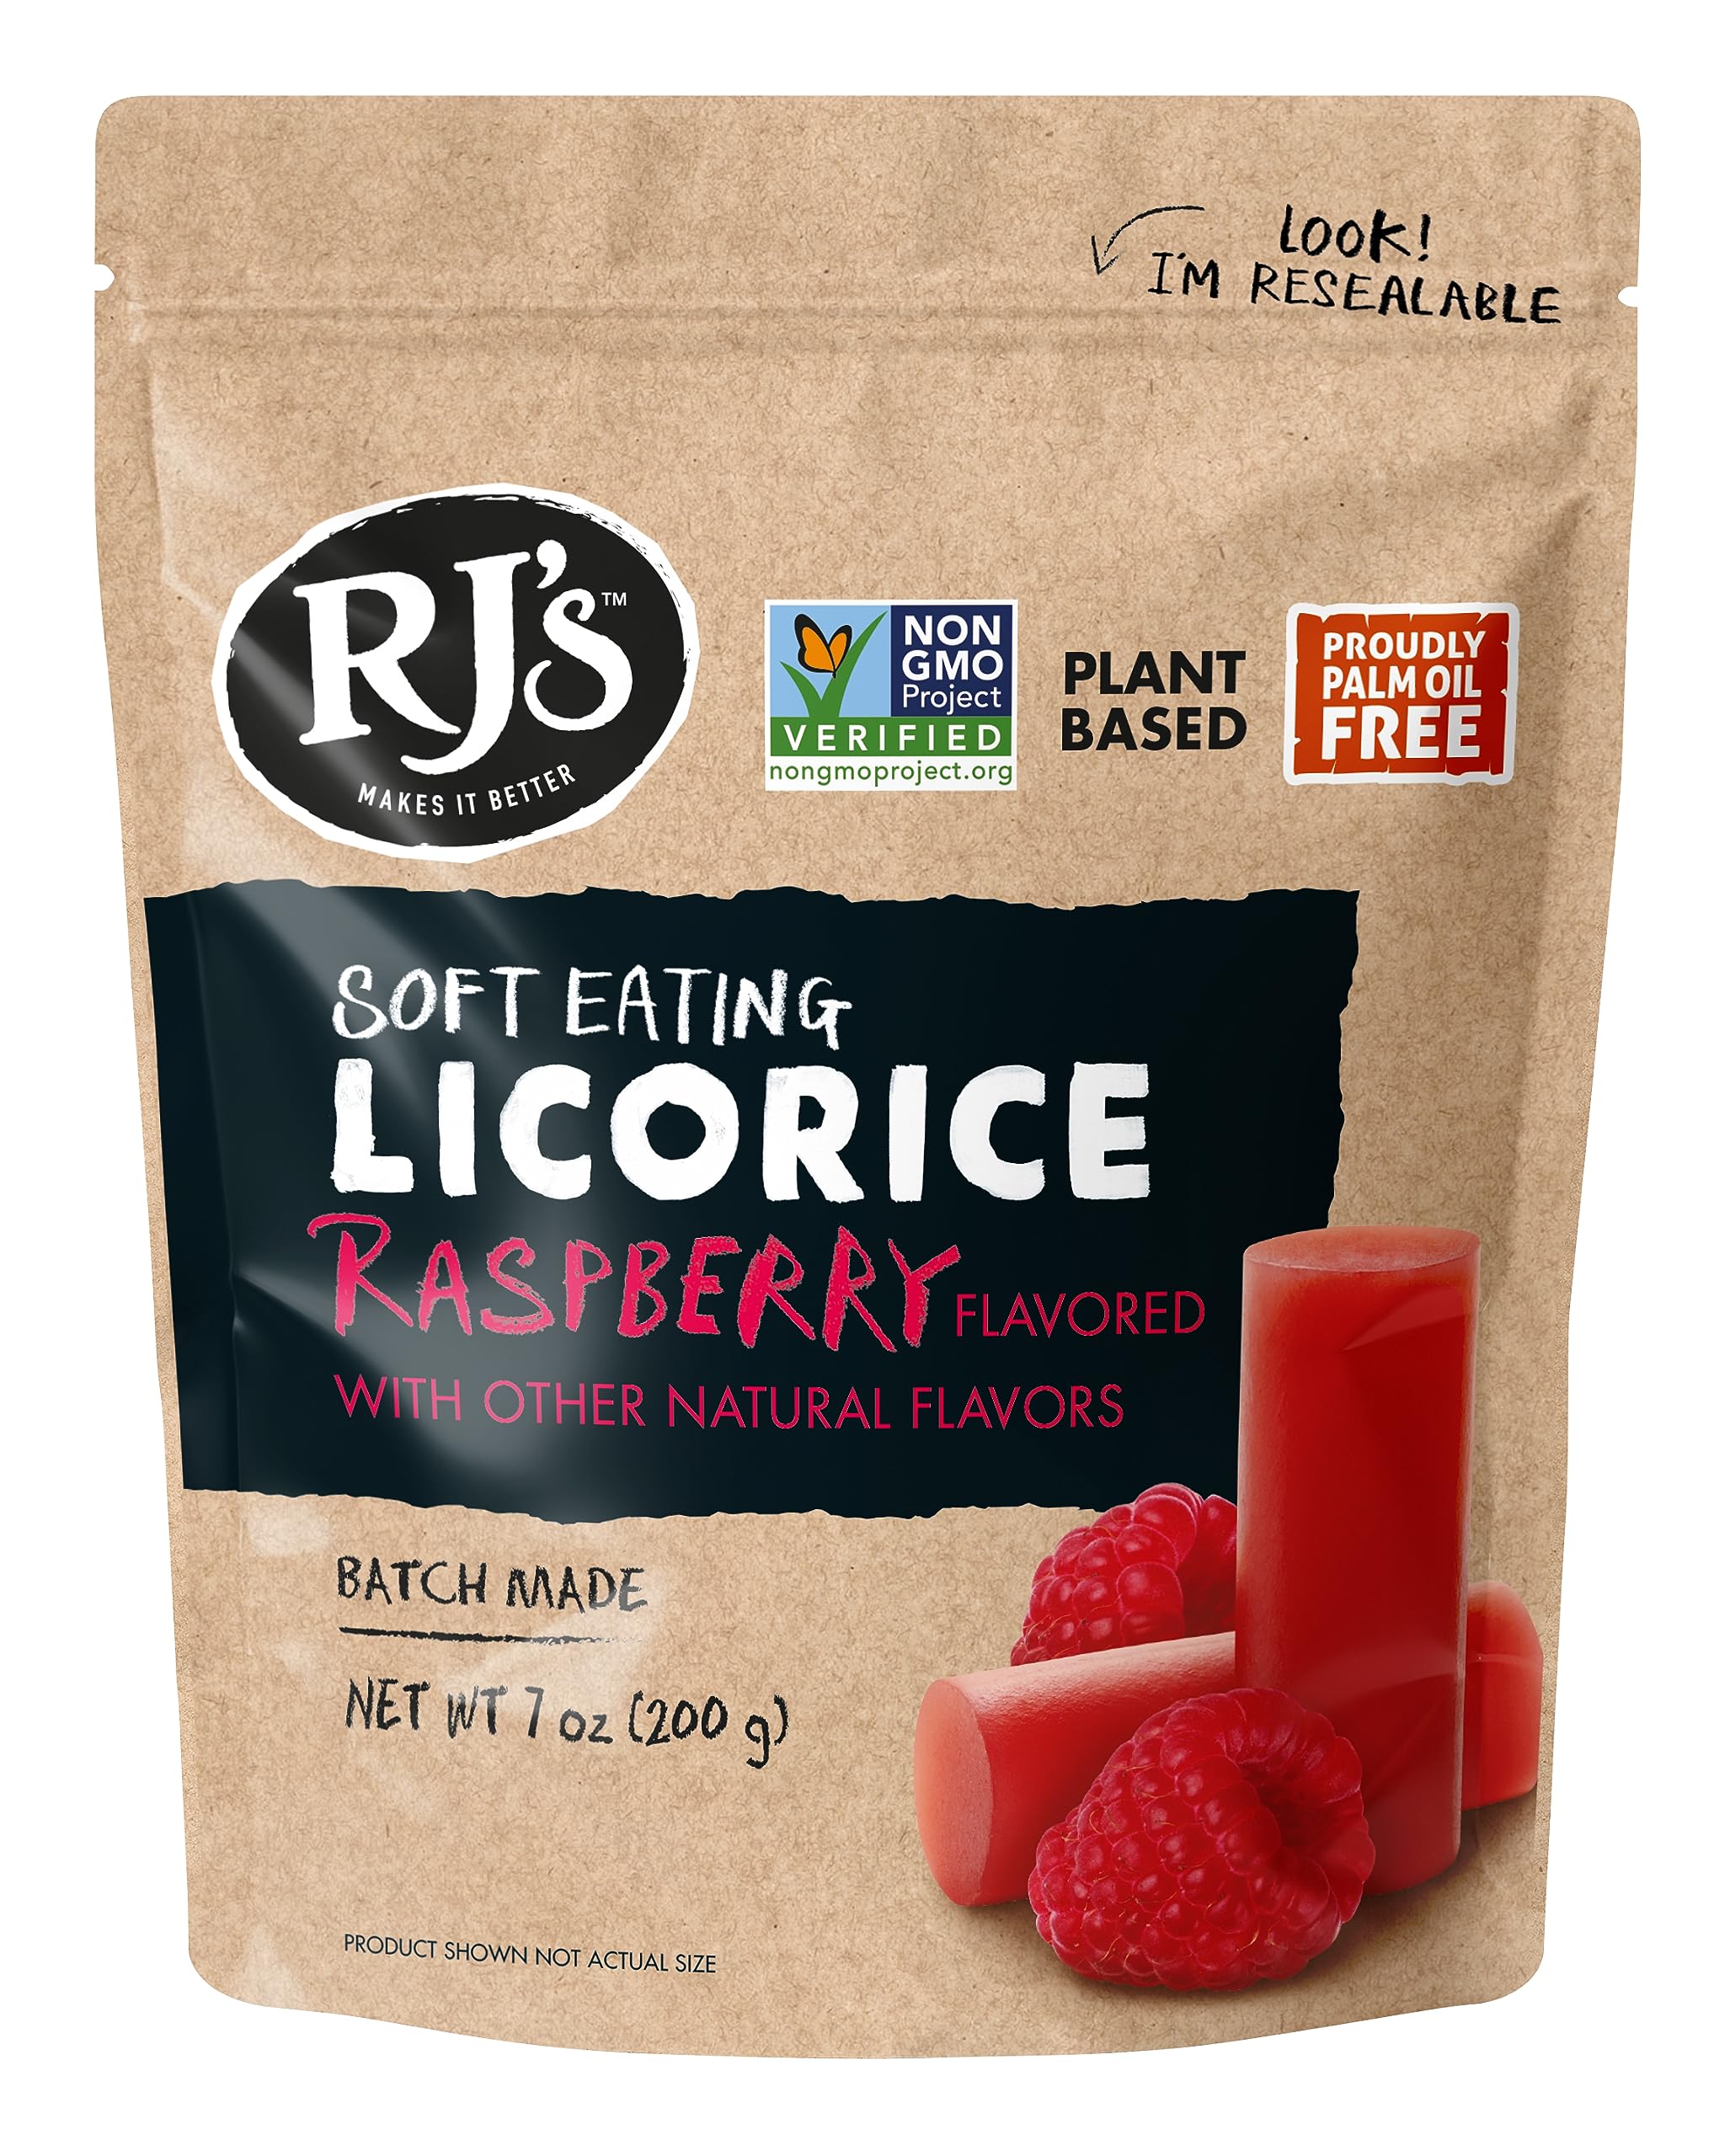 RJ's Soft Australian Licorice, Natural Raspberry Flavor, Resealable Bag, 7.05 Ounce (1-Pack) | Non-GMO, No Palm Oil, Plant Based | Soft & Chewy Licorice Candy, Batch Made in Australia